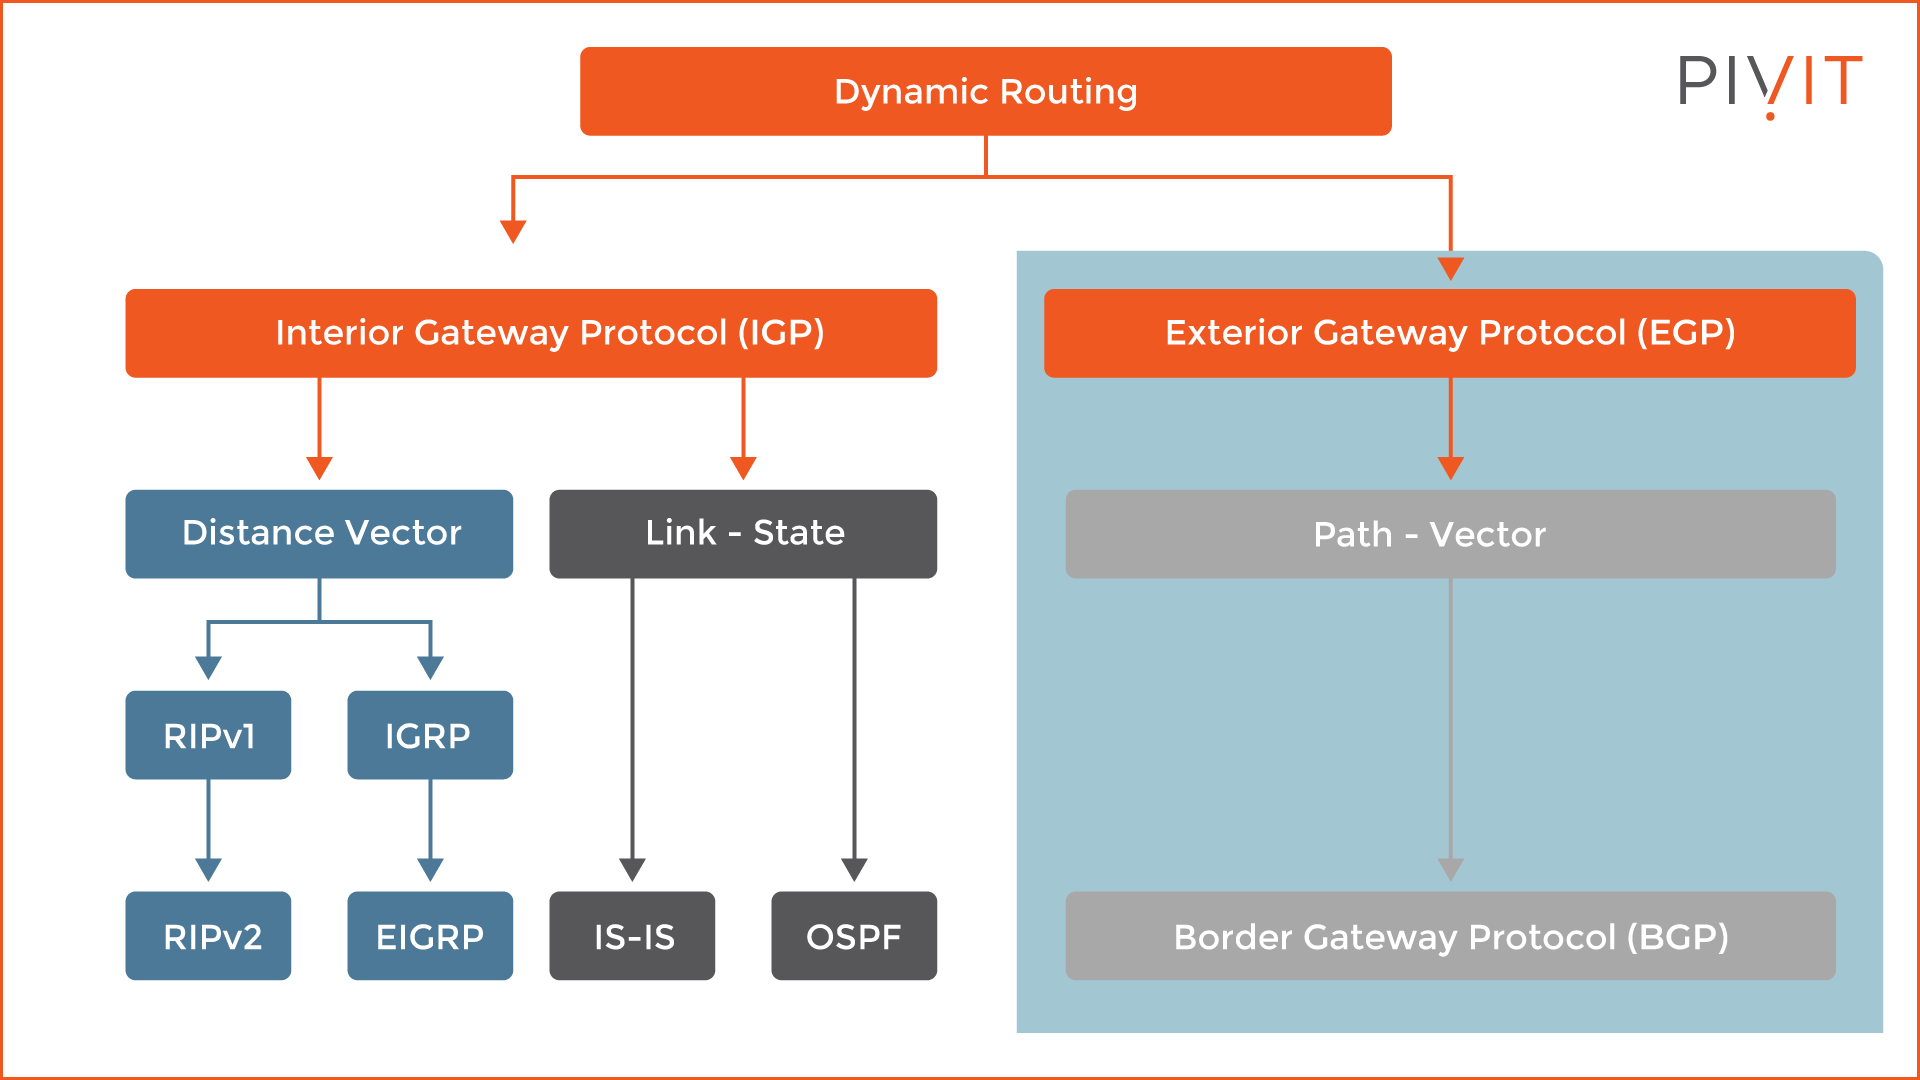 Dynamic routing overview flowchart highlighting the BGP exterior routing protocol